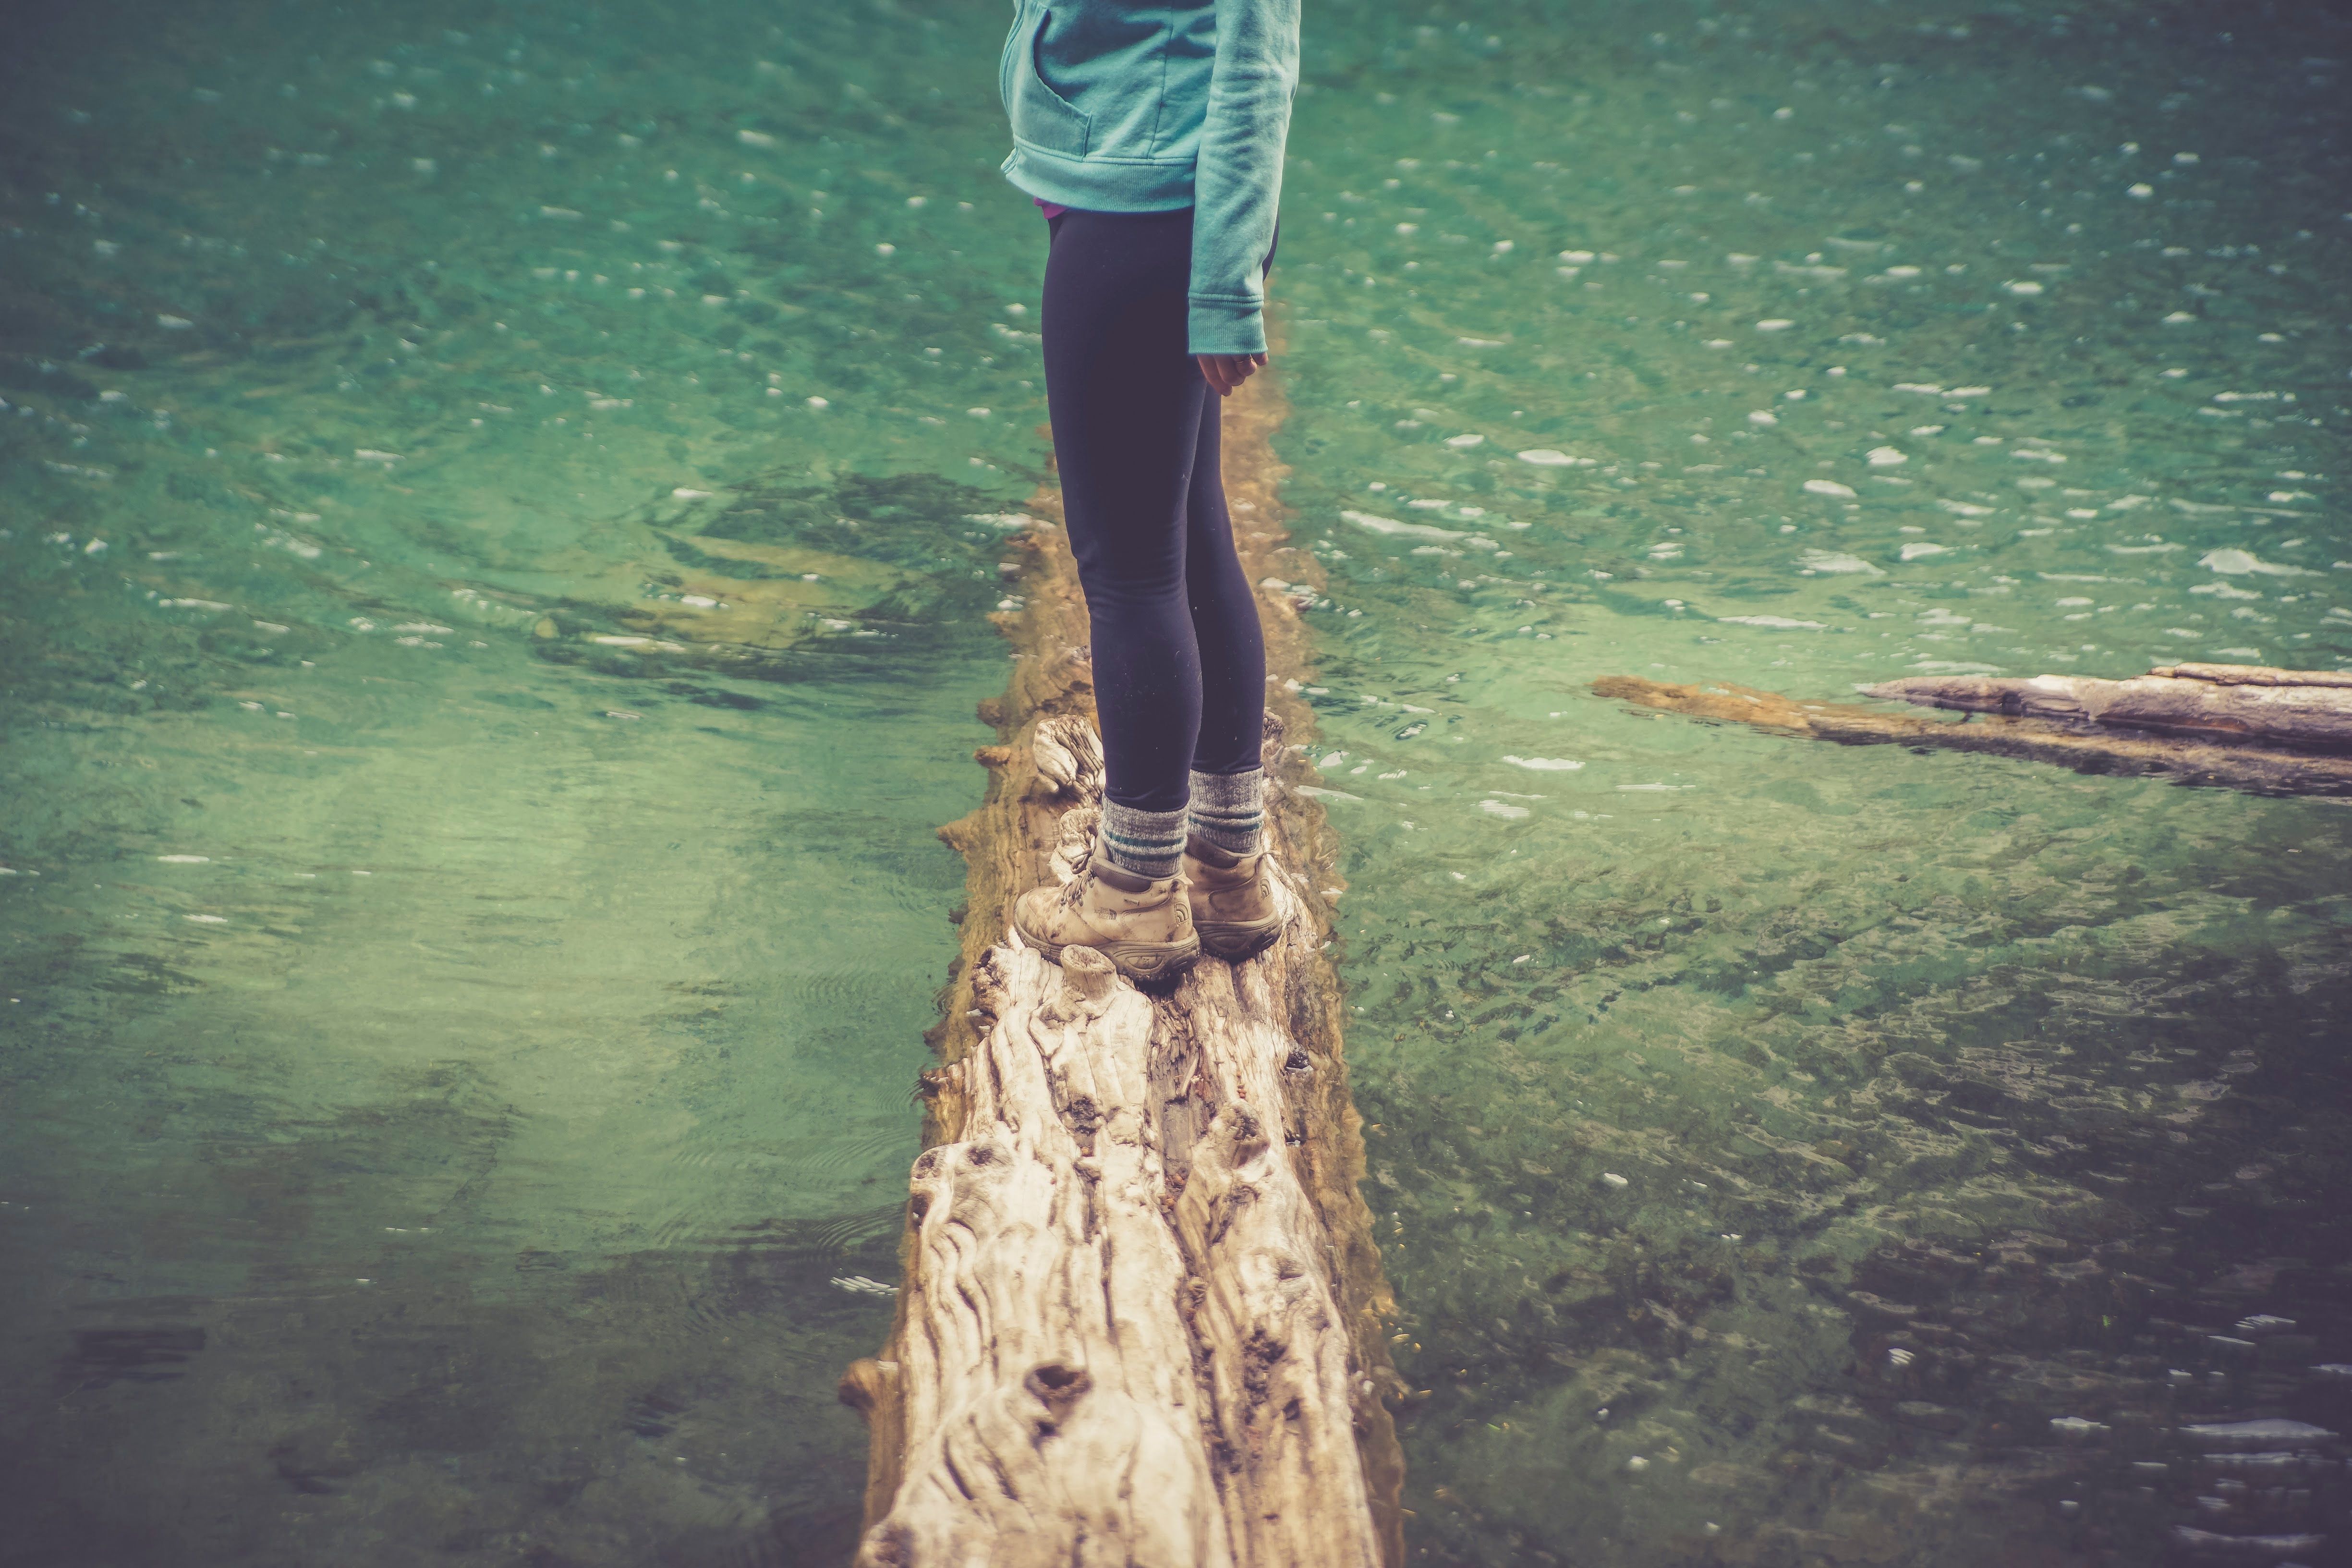 4898x3265 #girl, #walking boots, #Creative Commons image, #trunk, #nature, #stand, #hiking boots, #female, #river, #water, #lake, #woman, #balance, #tree, #hike, #clear, #lady, #wood, #log, #person, #walk. Mocah.org HD Desktop Wallpaper